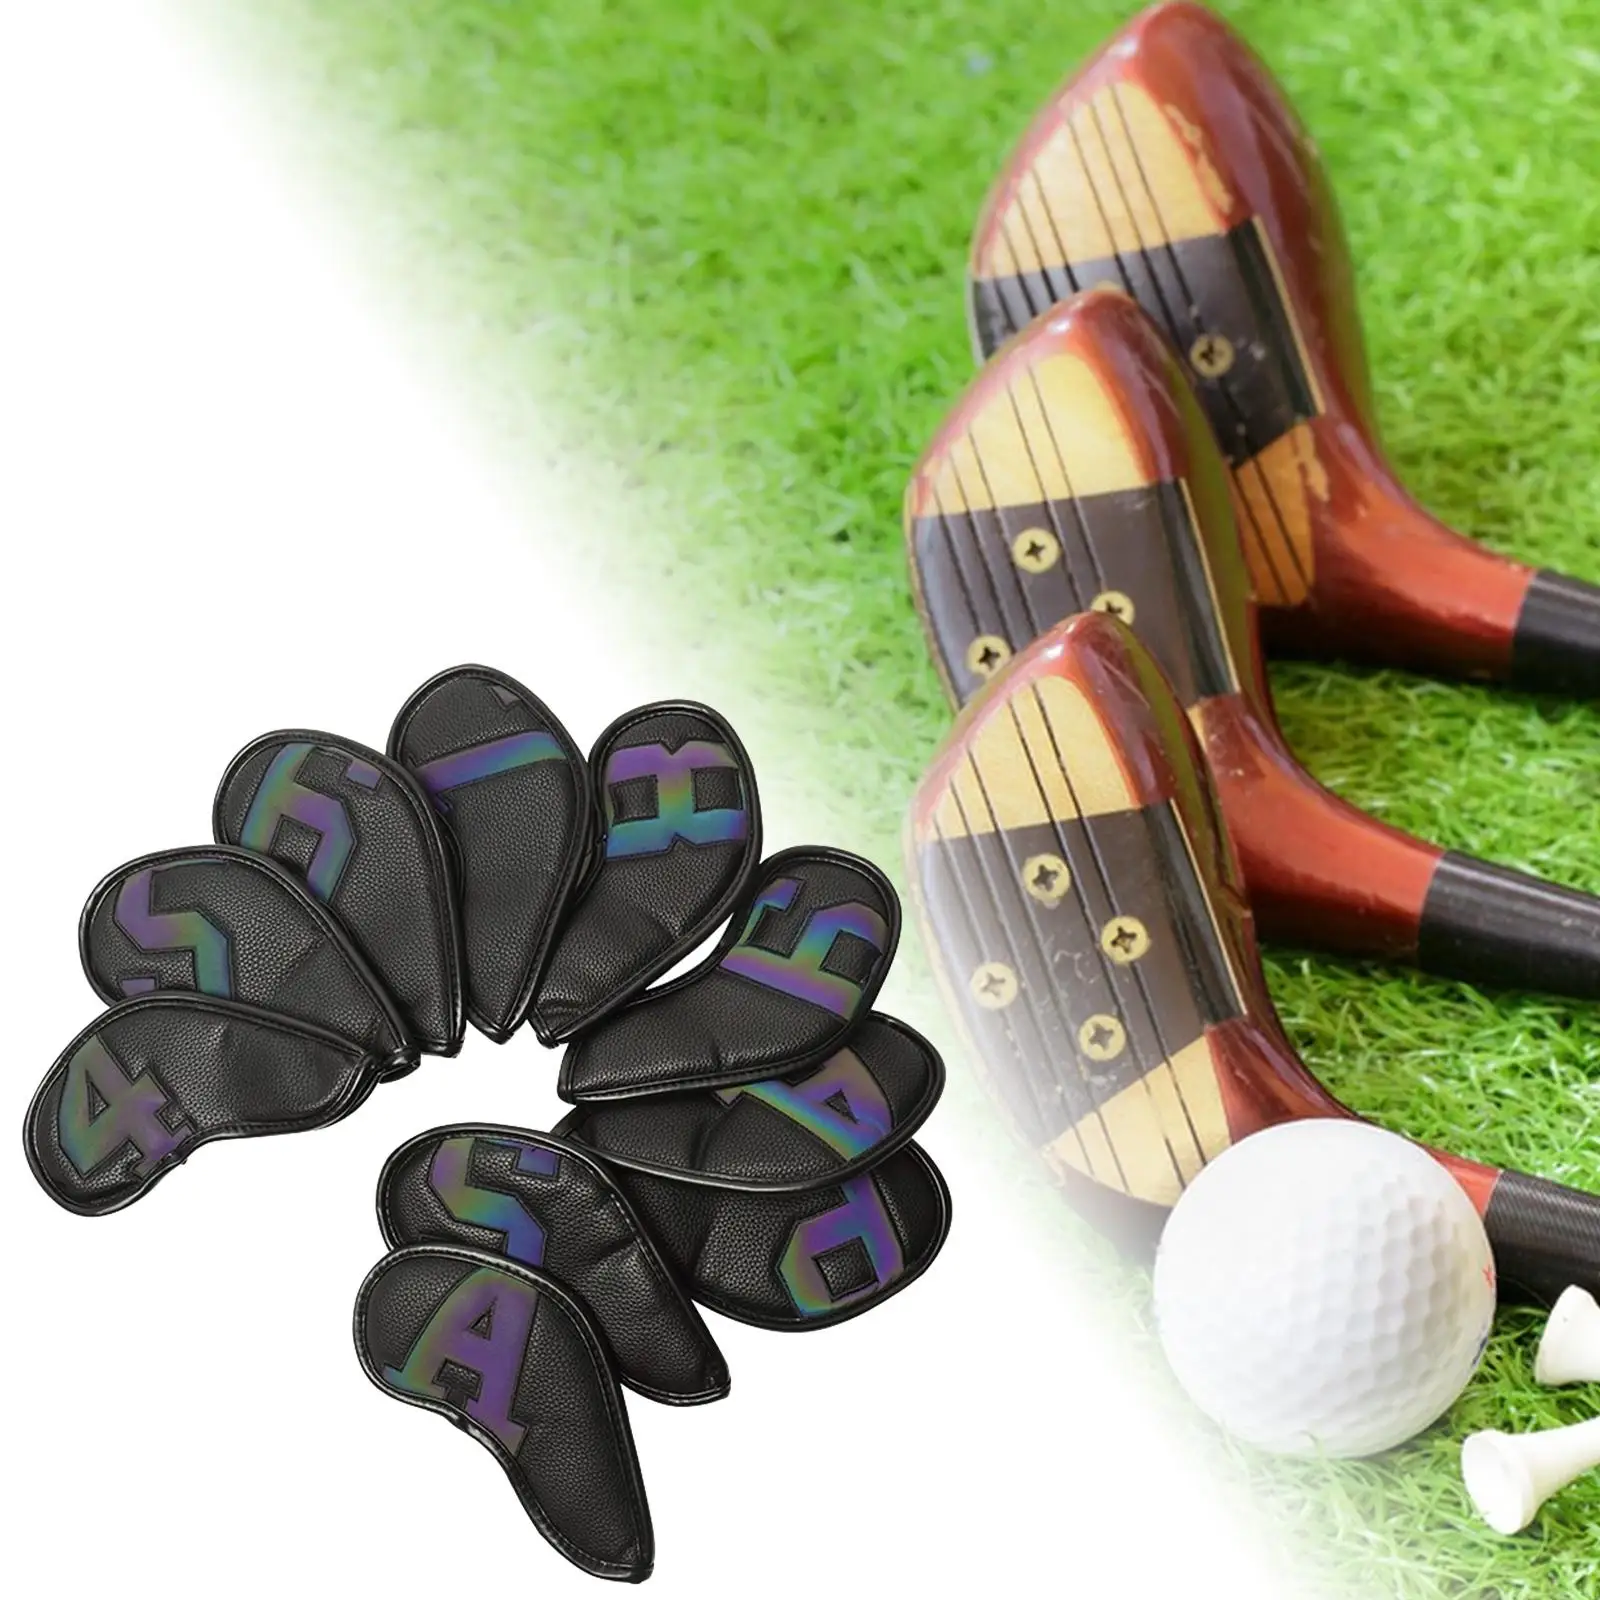 10Pcs Golf Iron Covers Set Water Resistant Wear Resistant Golf Club Headcover for Players Shaft Outdoor Sports Club Display